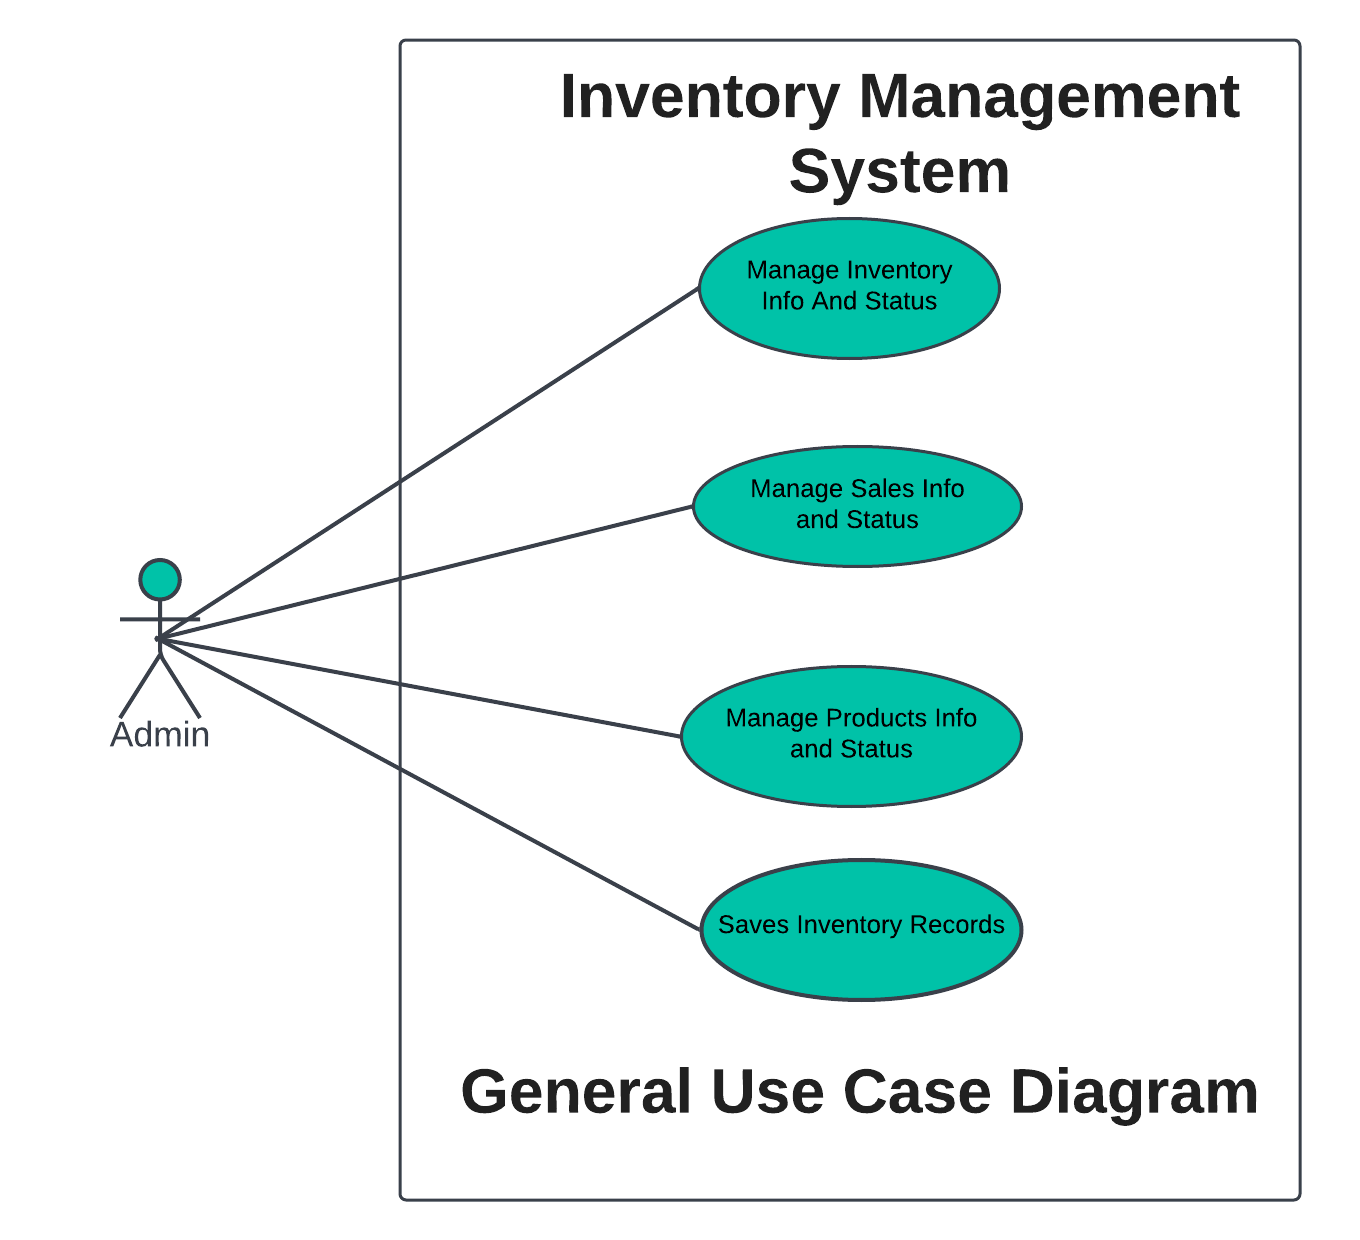 INVENTORY MANAGEMENT SYSTEM USE CASE DIAGRAM